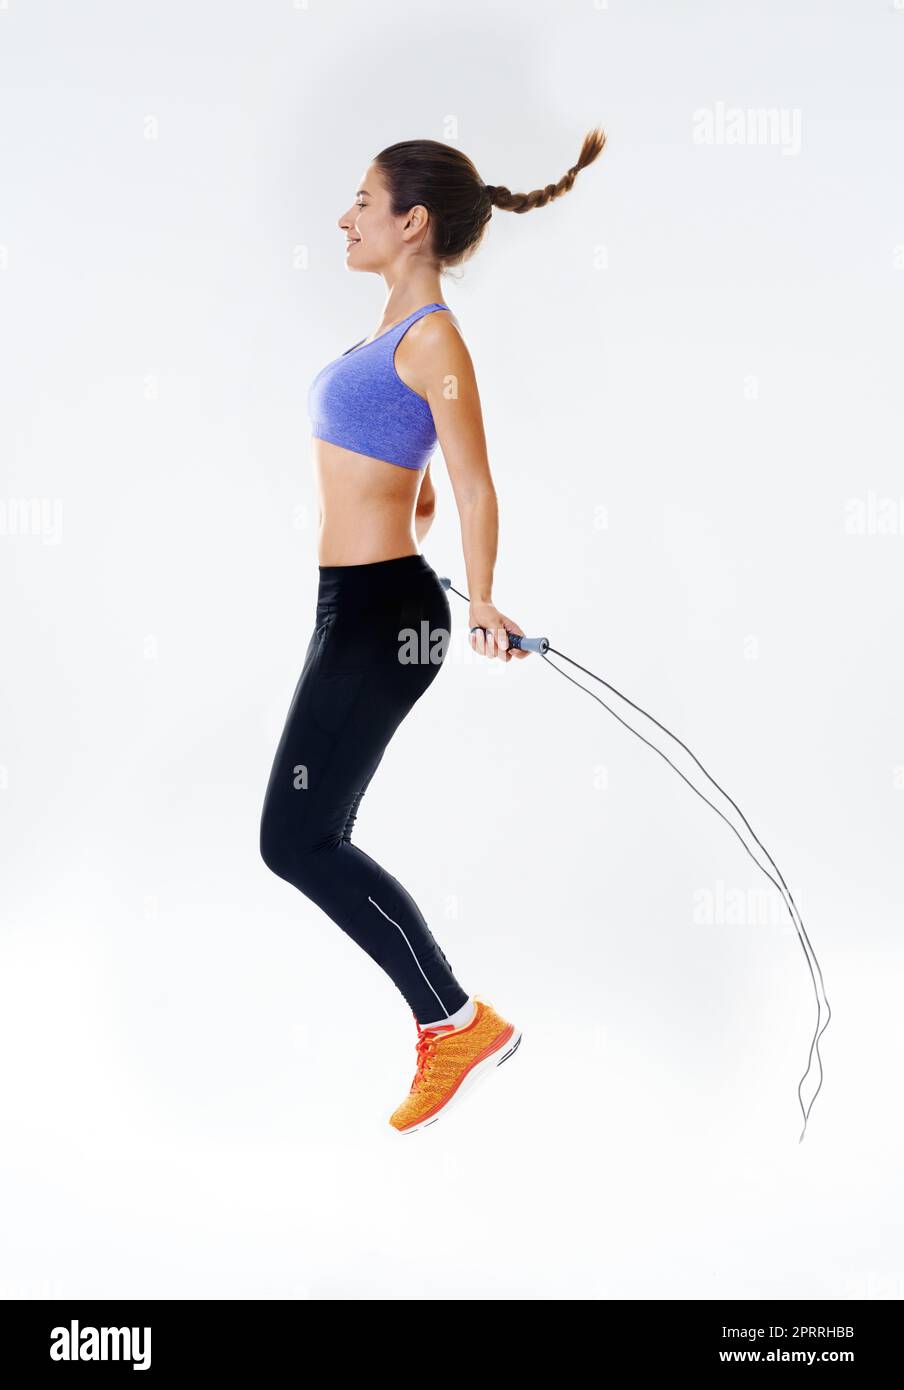 Working up a sweat. Studio shot of an attractive young woman working out. Stock Photo